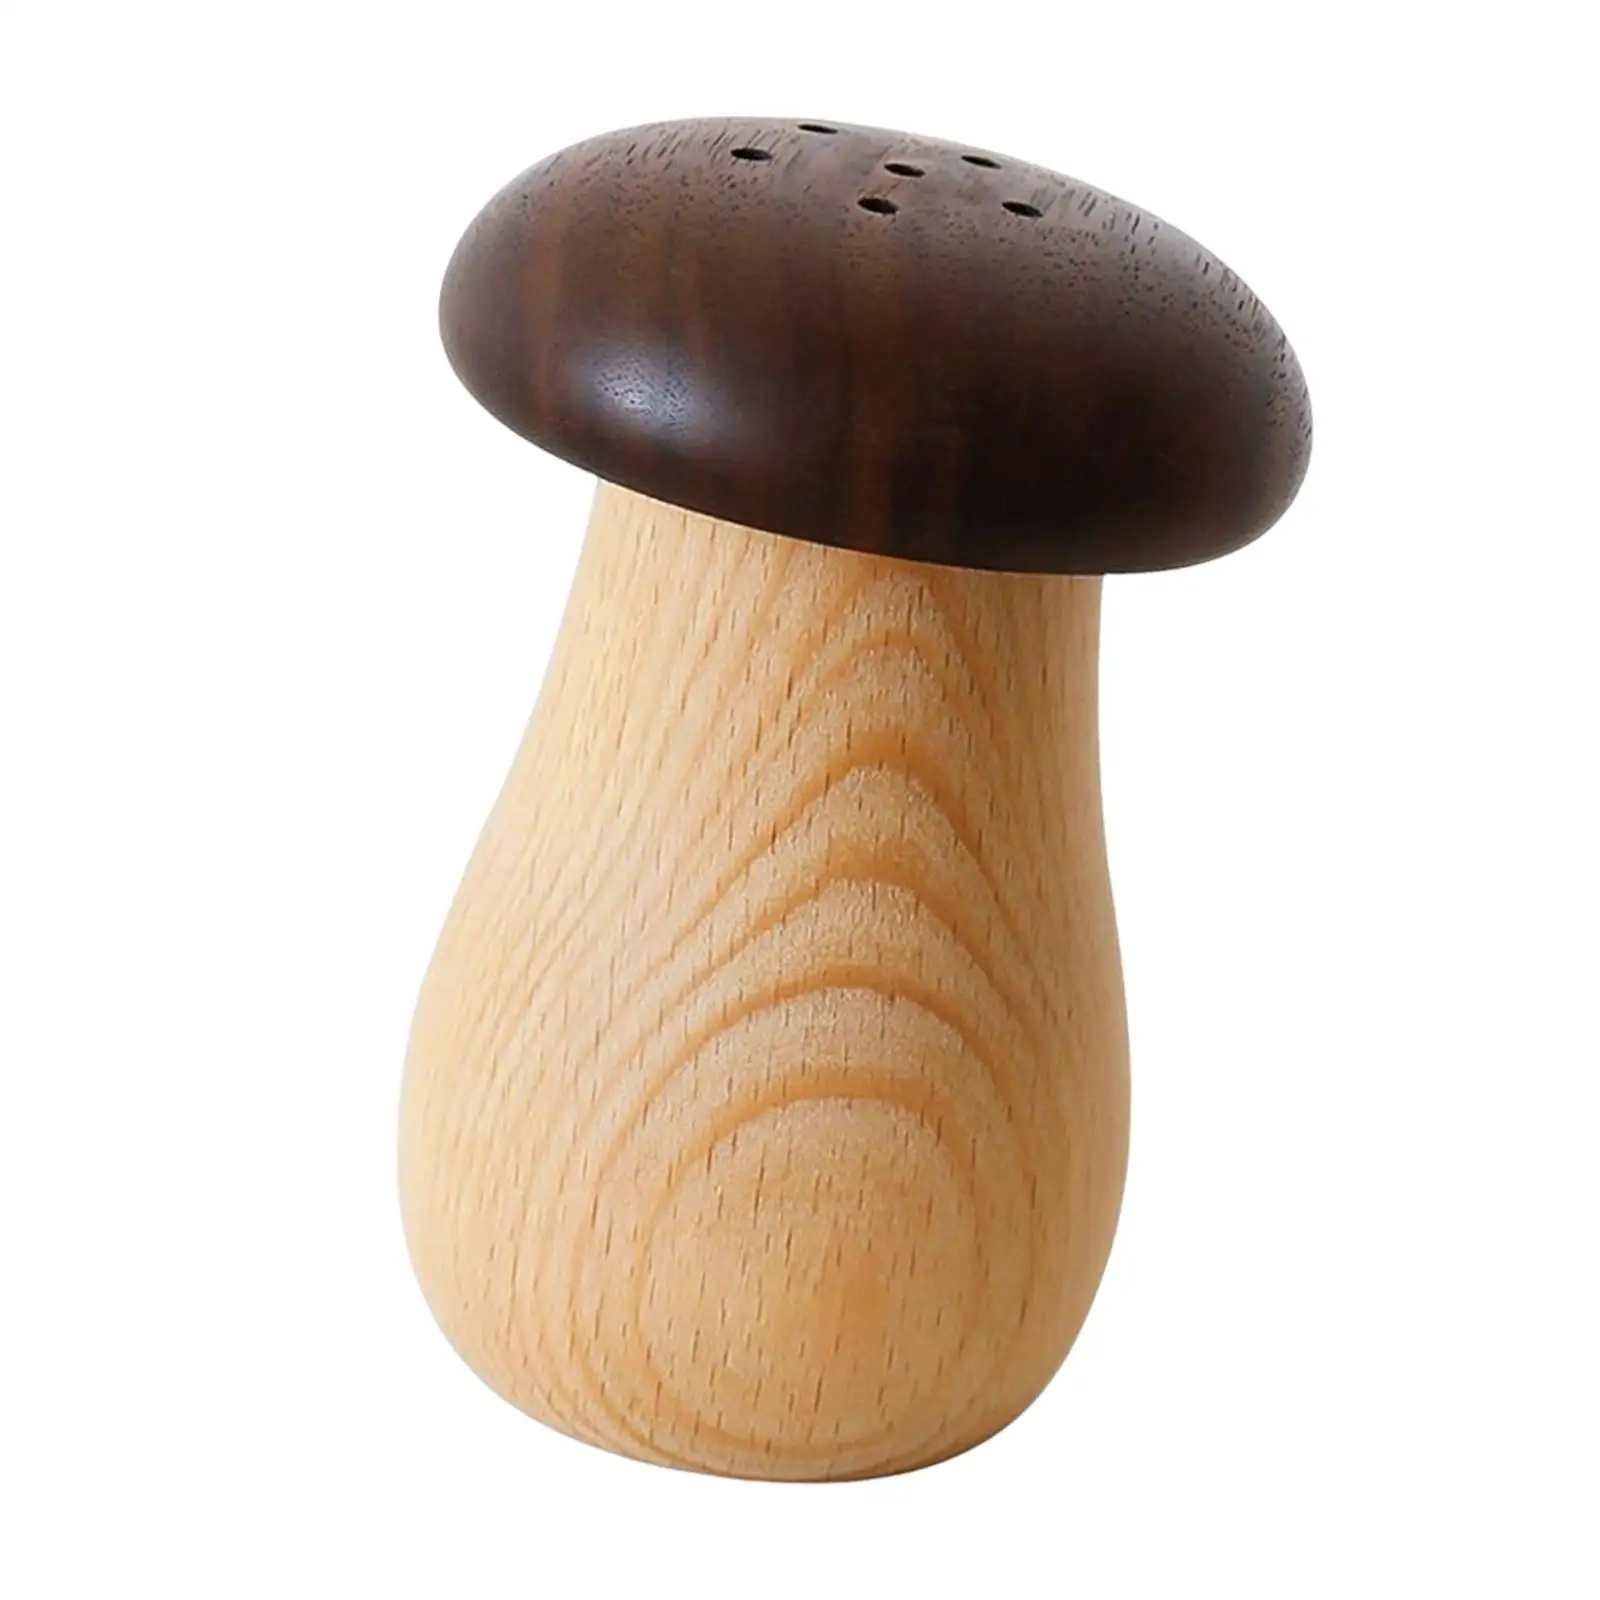 Portable Toothpick Dispenser Mushroom Toothpick Box Container Toothpick Holder Cute for Restaurants Kitchen Bars Hotels Gifts